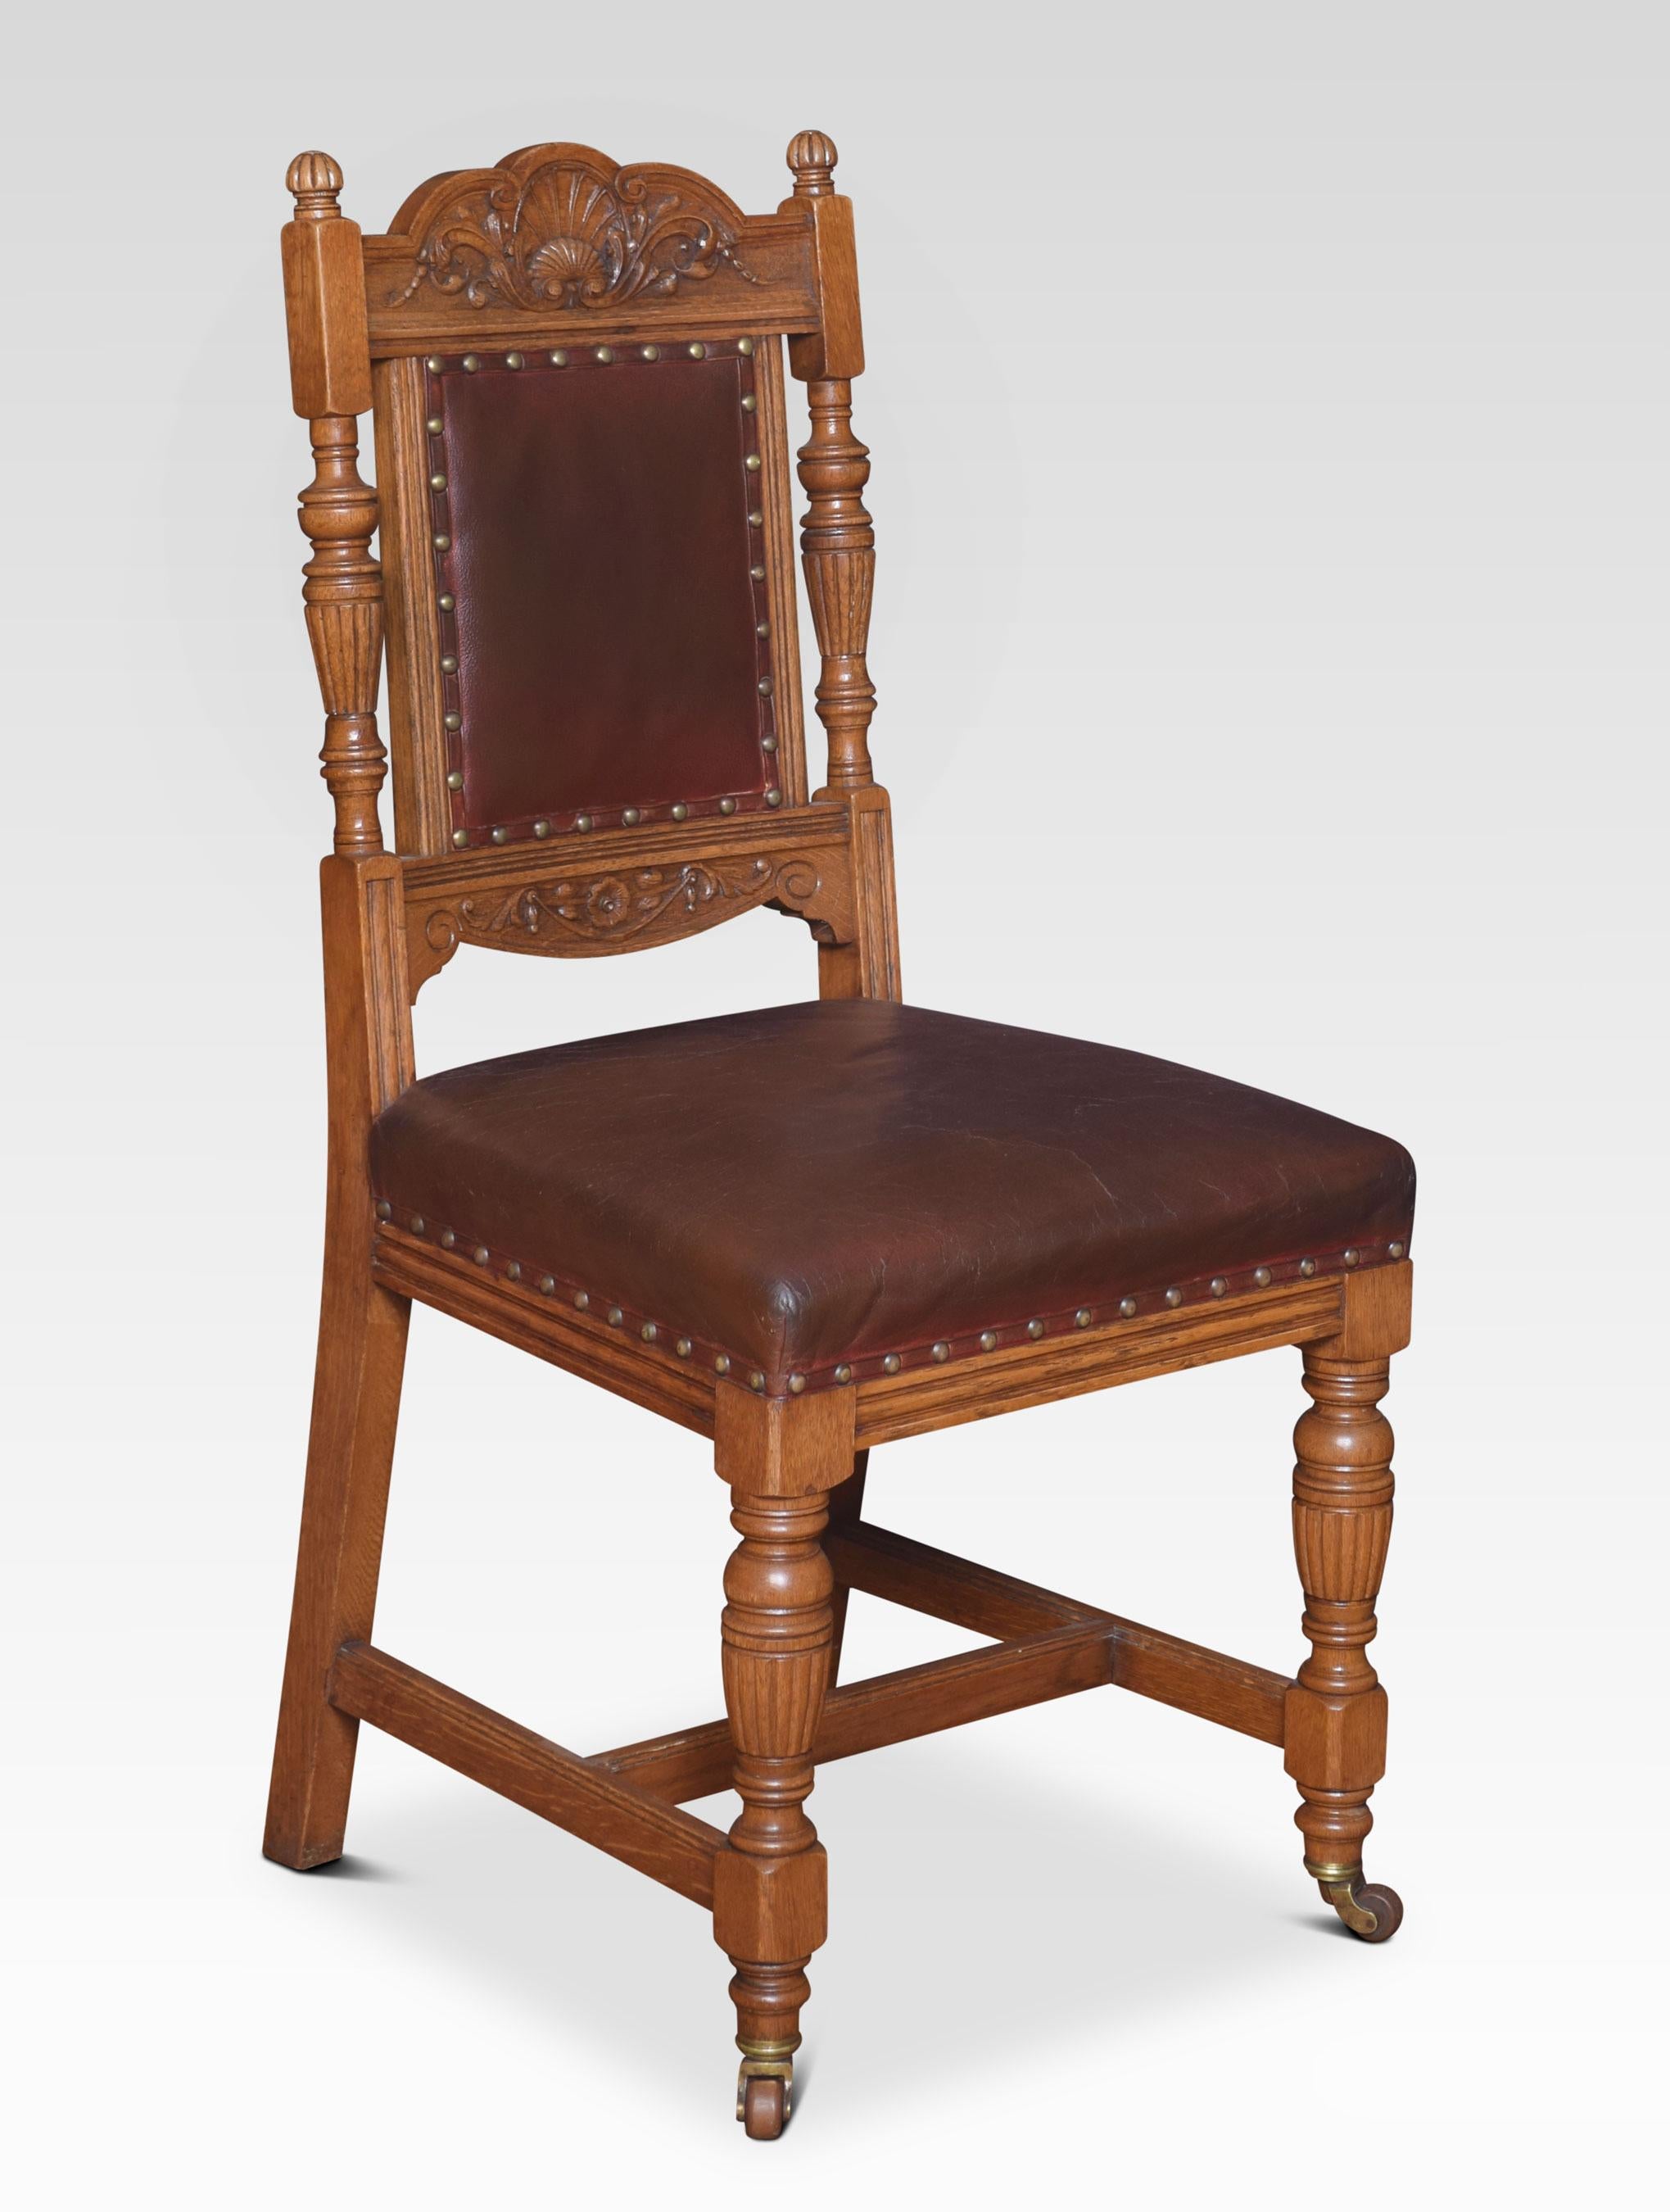 Set of ten oak dining chairs, each with scallop shell and leaf carved cresting rails, padded backs, and stuff over seats, each raised upon lobed fluted vase supports and casters joined by H-stretcher.
Dimensions:
Height 39 inches height to seat